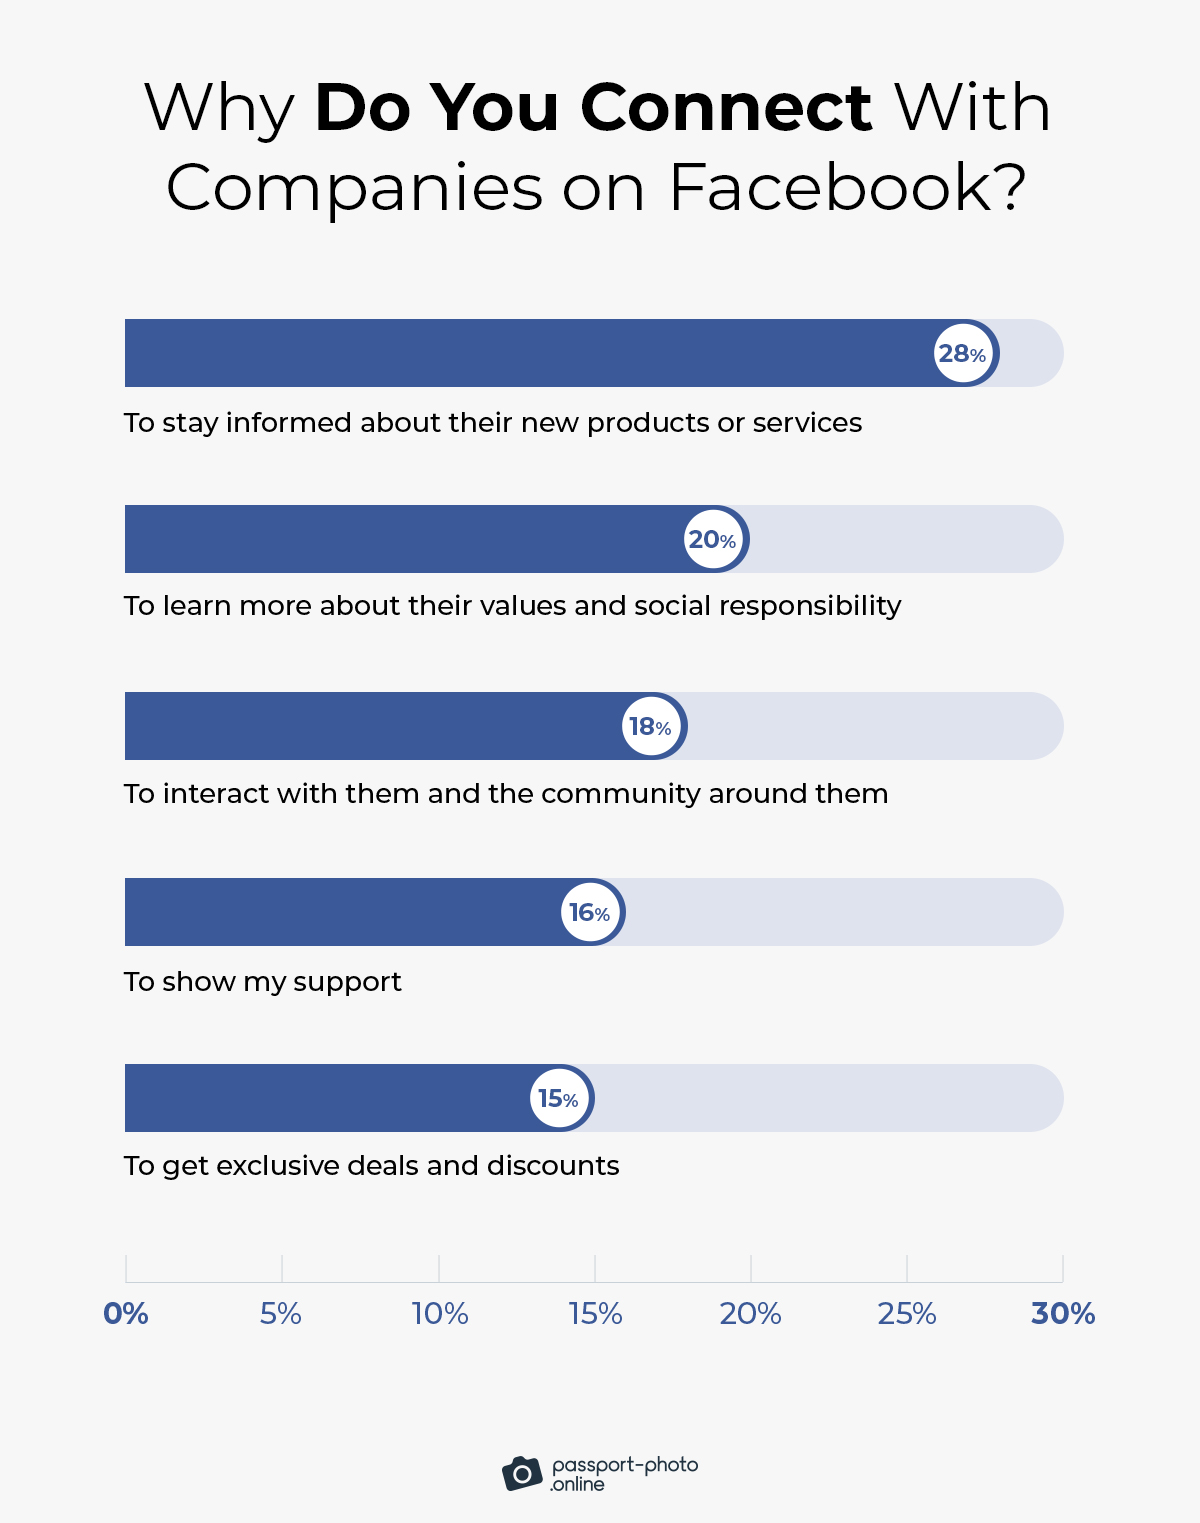 the #1 reason to “like” a company is to stay in the loop about its new products and/or services (28%)